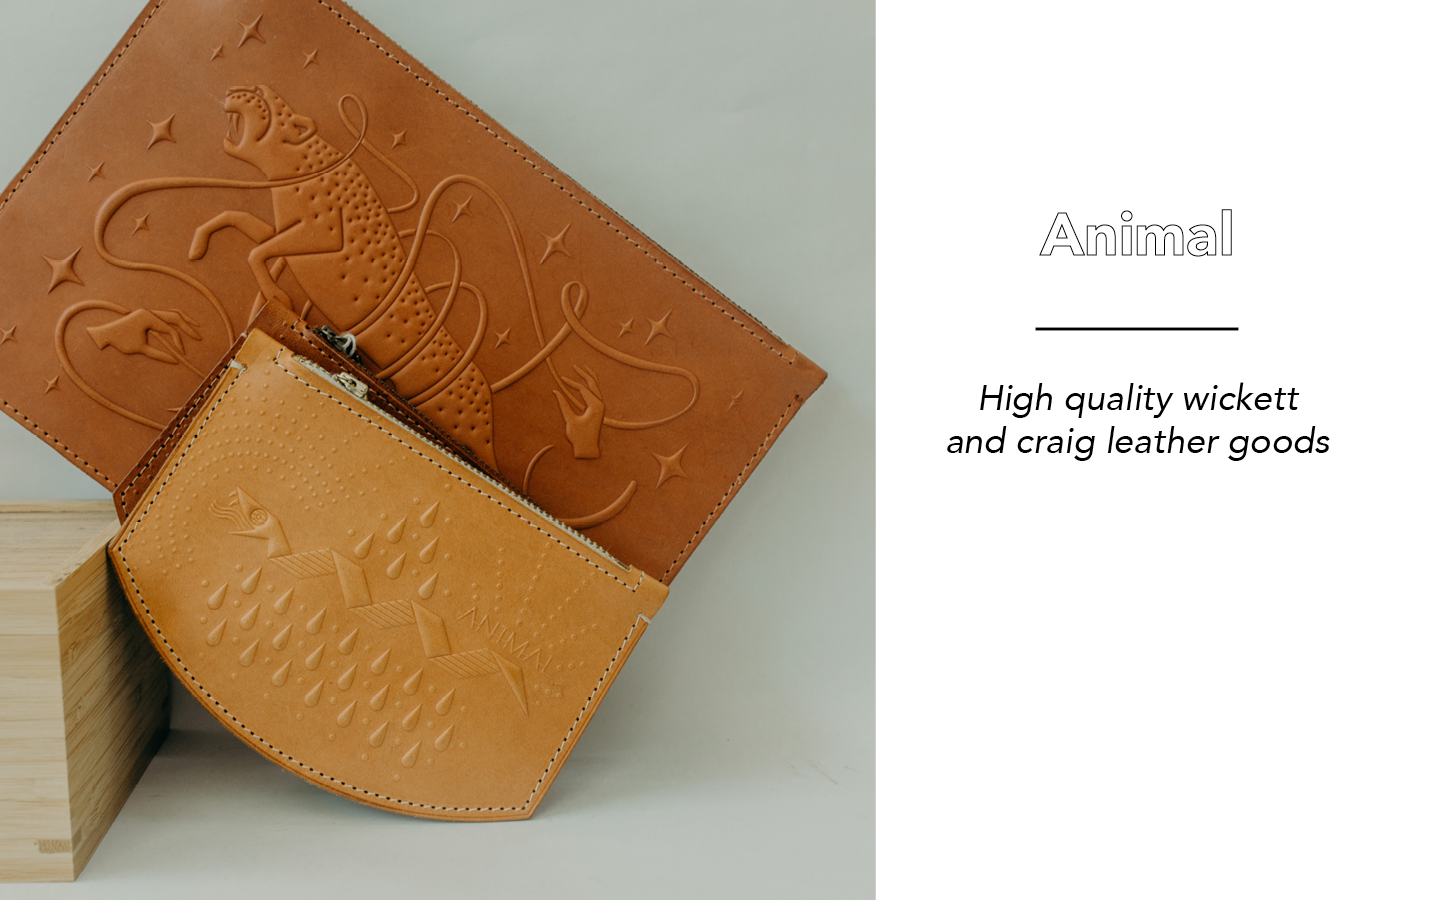 Tan leather hand bags with a depiction of a leopard mid stride